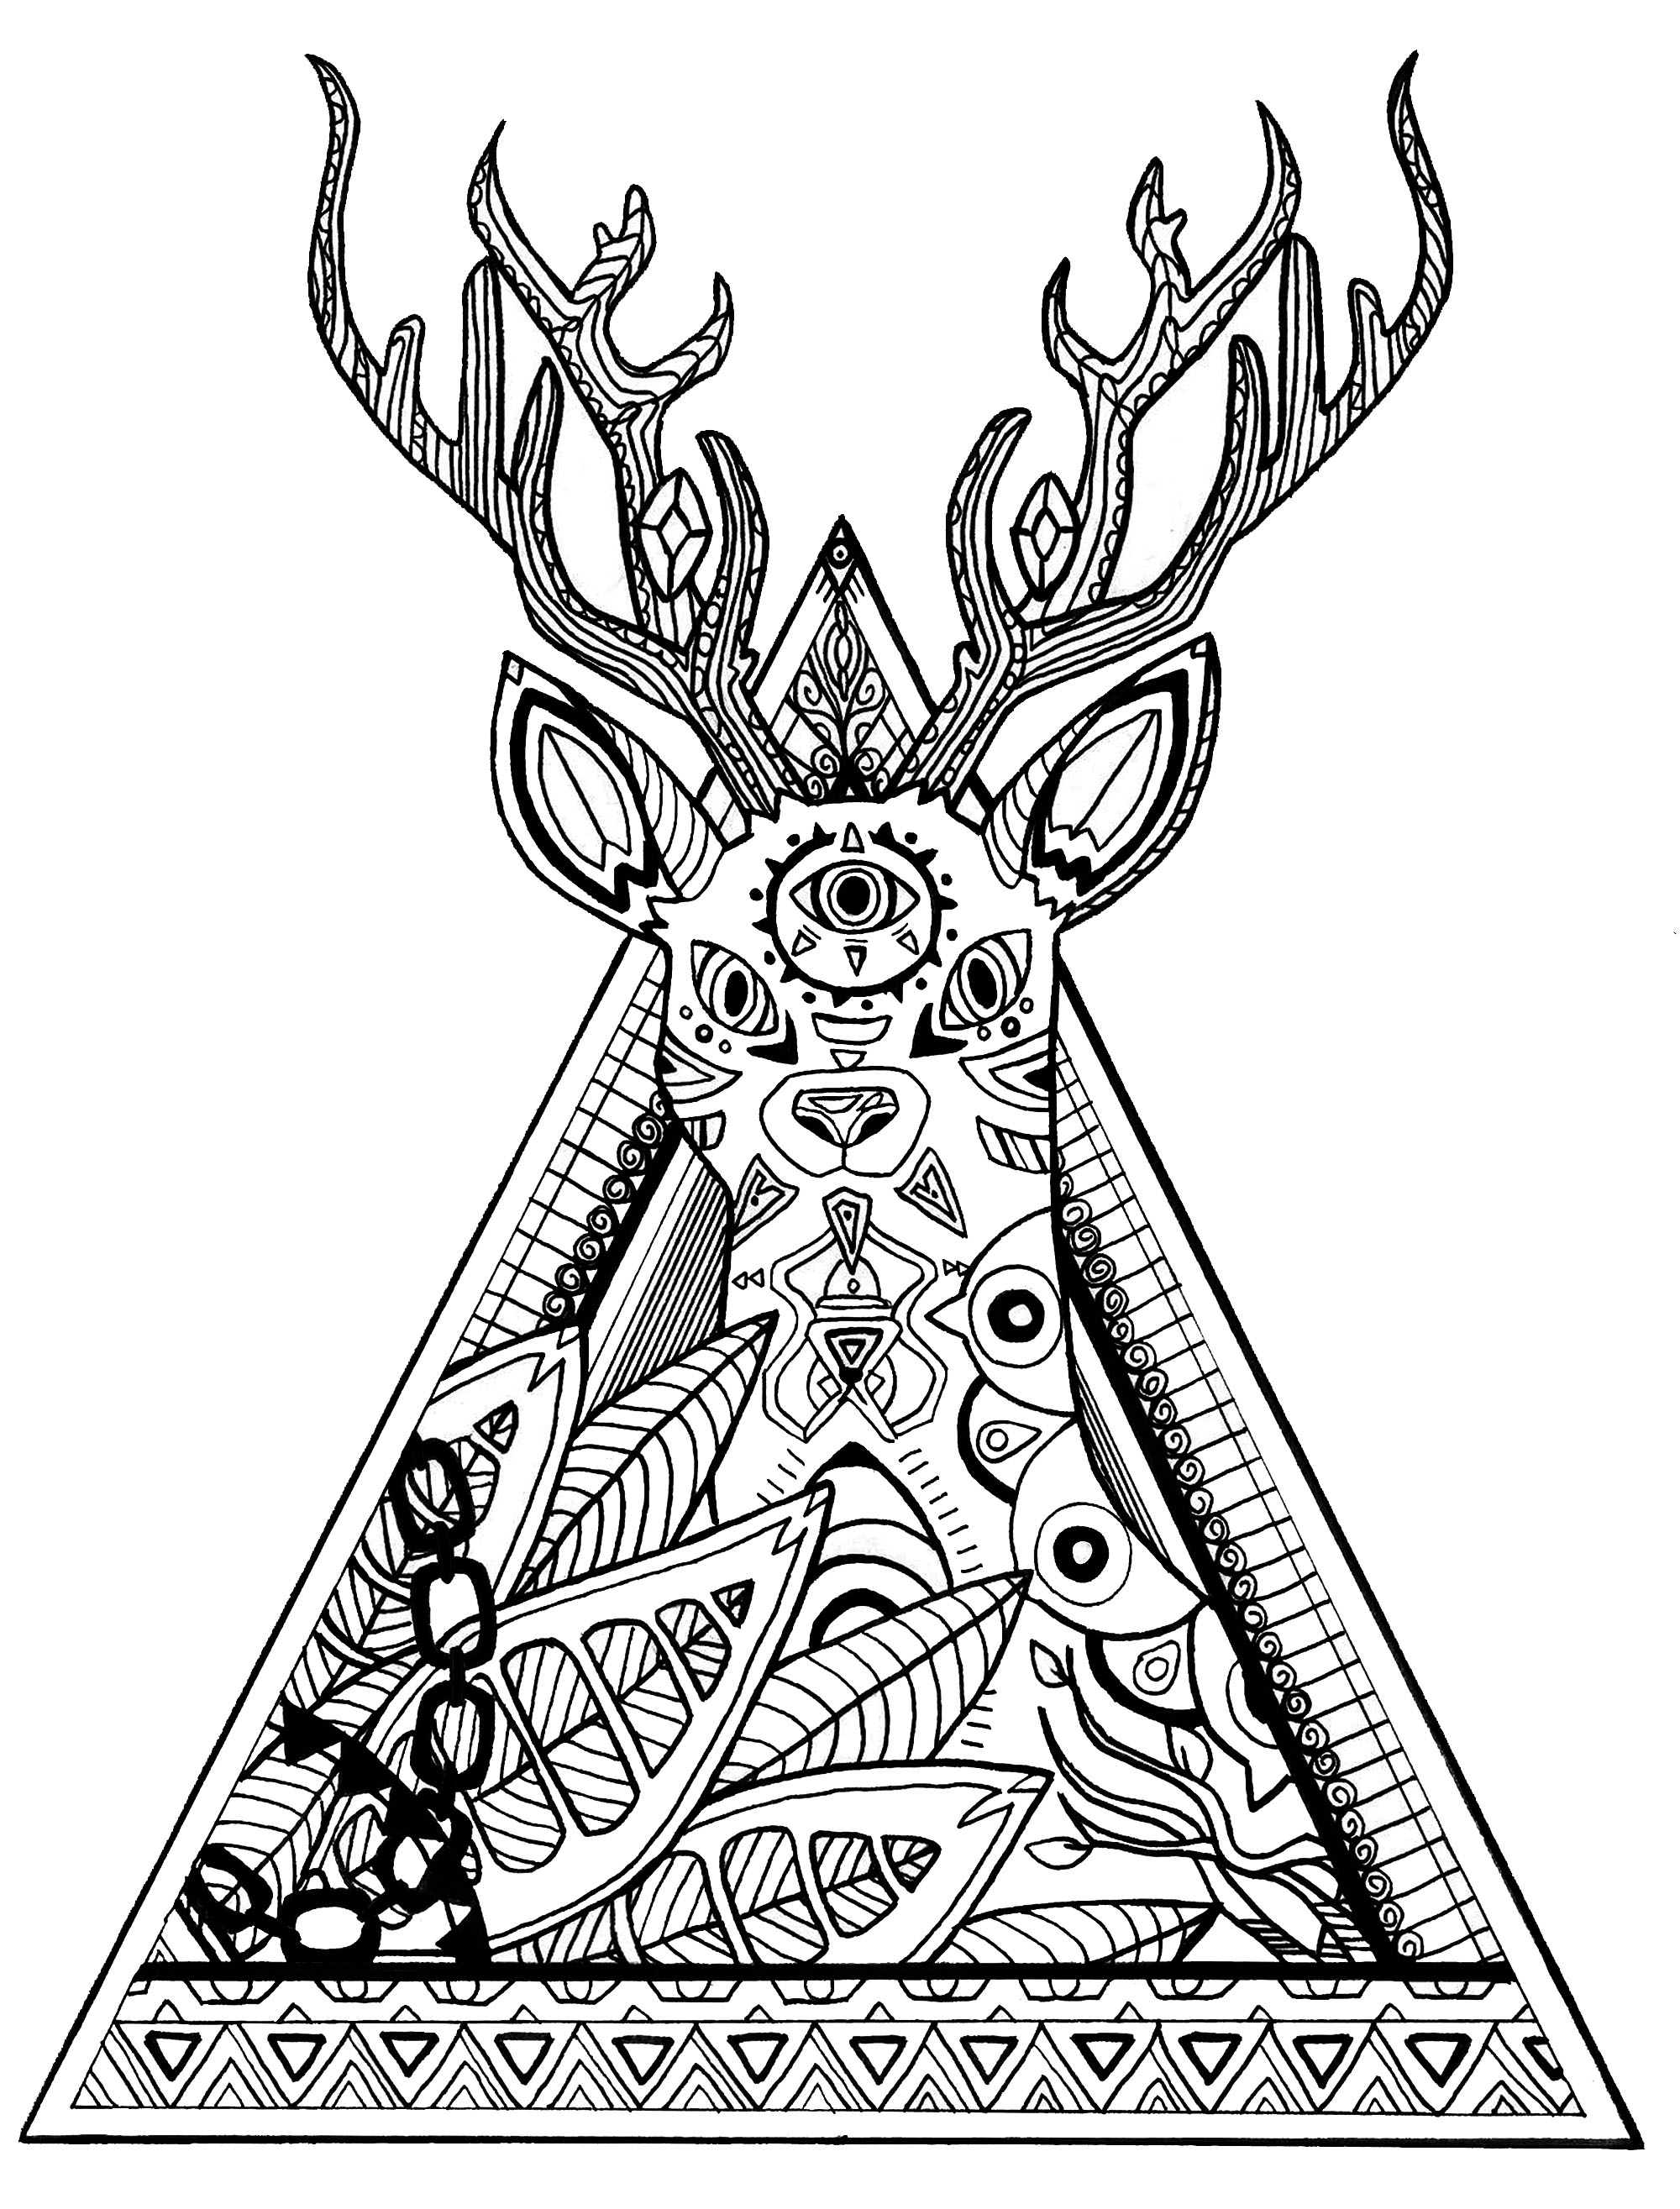 Deer Coloring Pages Deer In A Triangle Deers Adult Coloring Pages